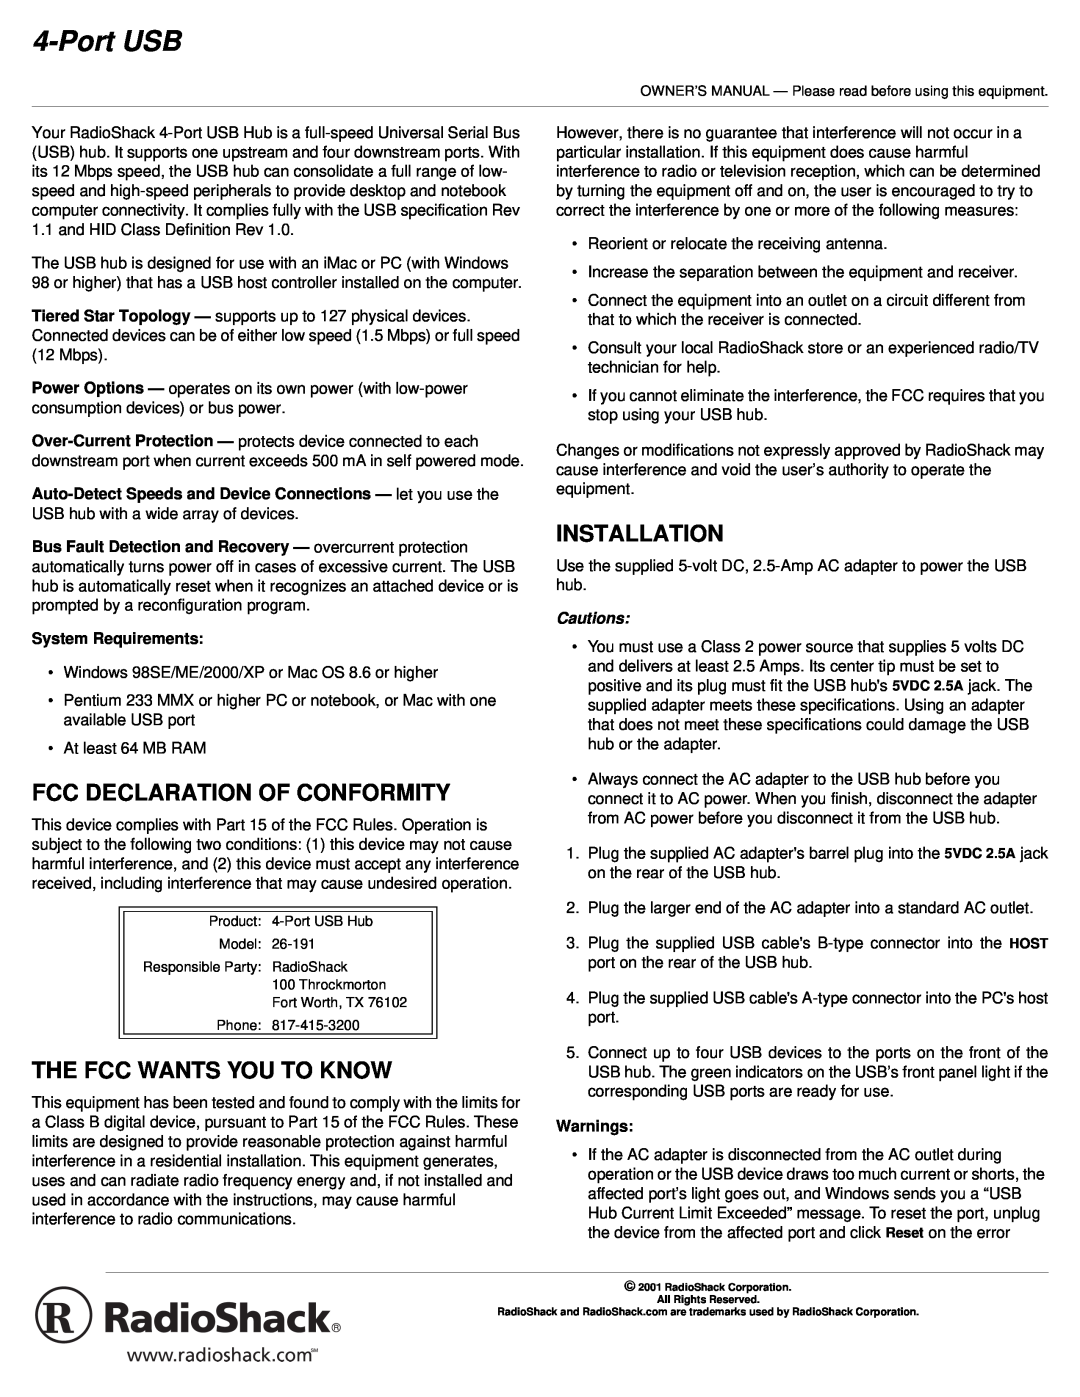 Radio Shack 26-191 owner manual Fcc Declaration Of Conformity, The Fcc Wants You To Know, Installation, Port USB, Cautions 